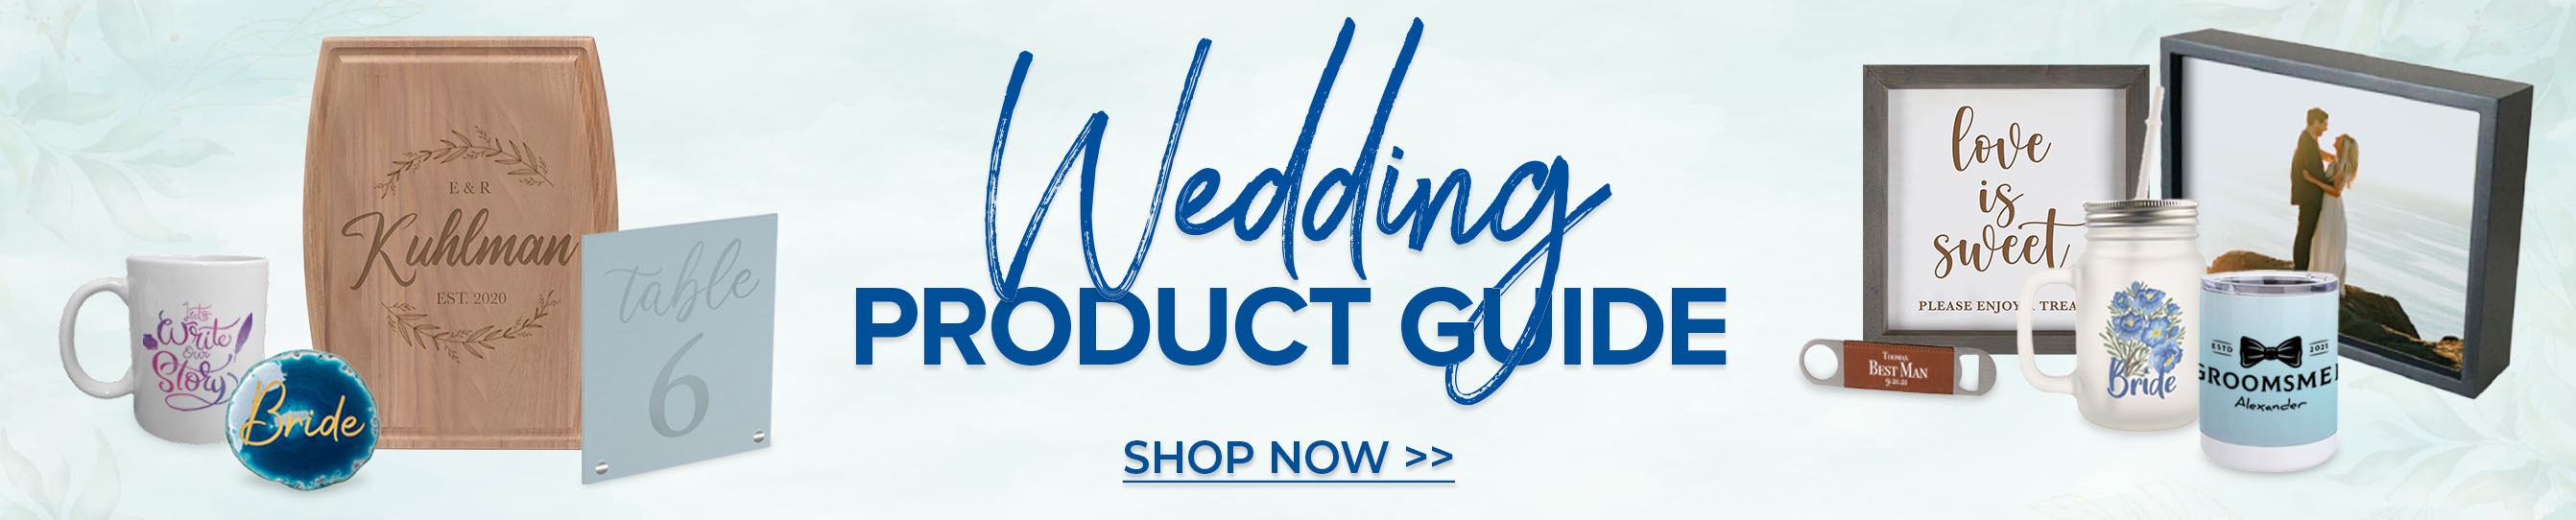 Wedding Product Guide Shop Now